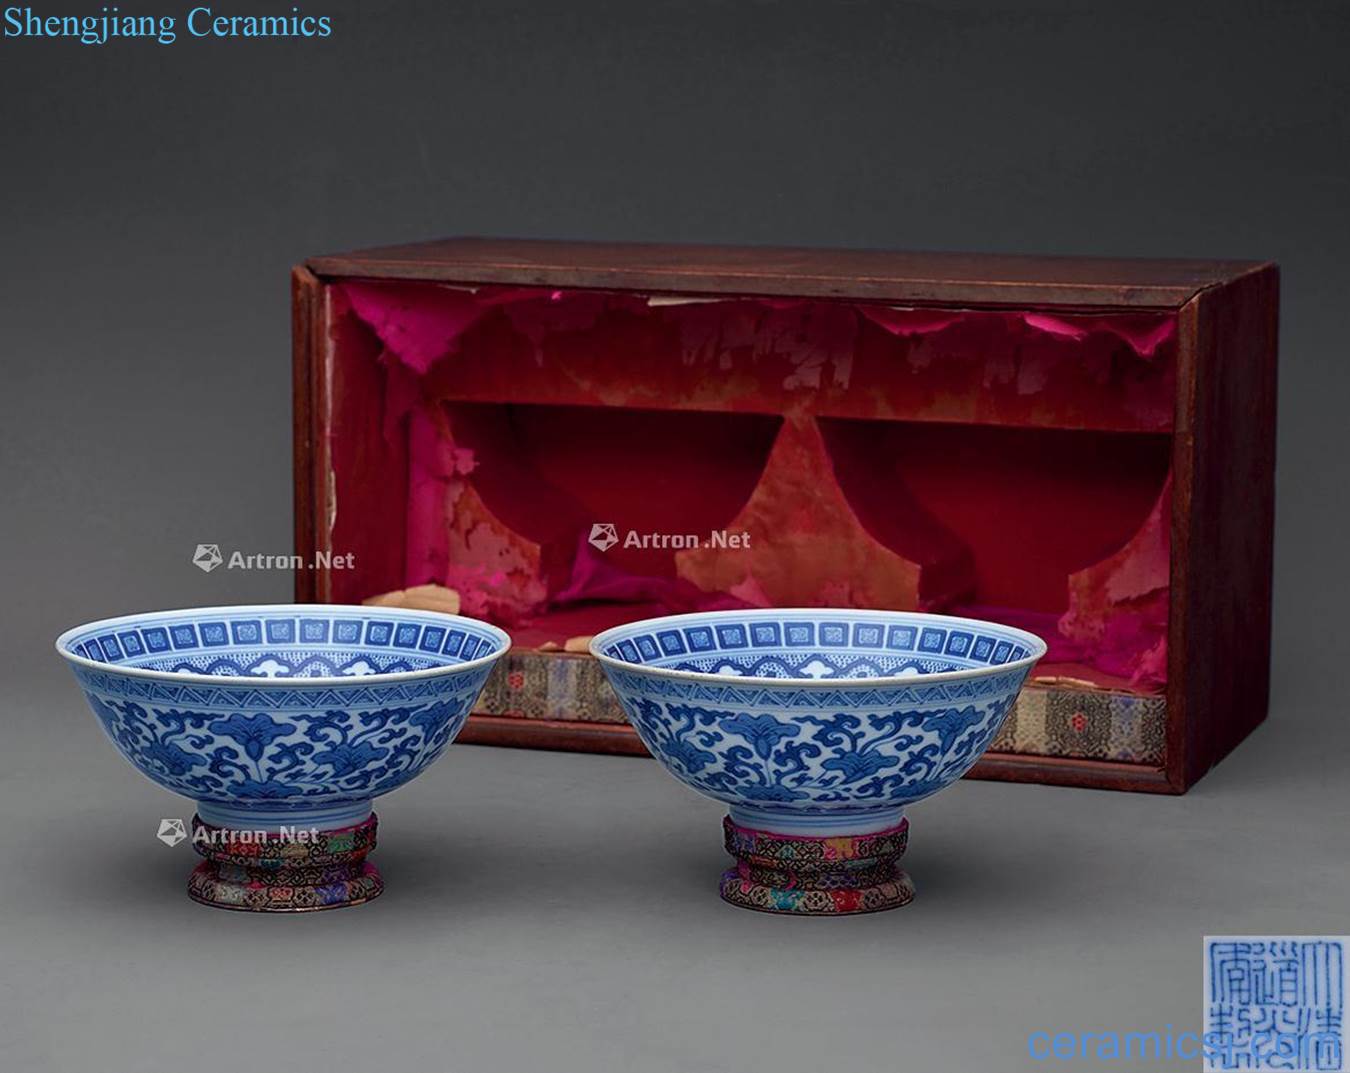 Qing daoguang Blue and white flower bowl (a)